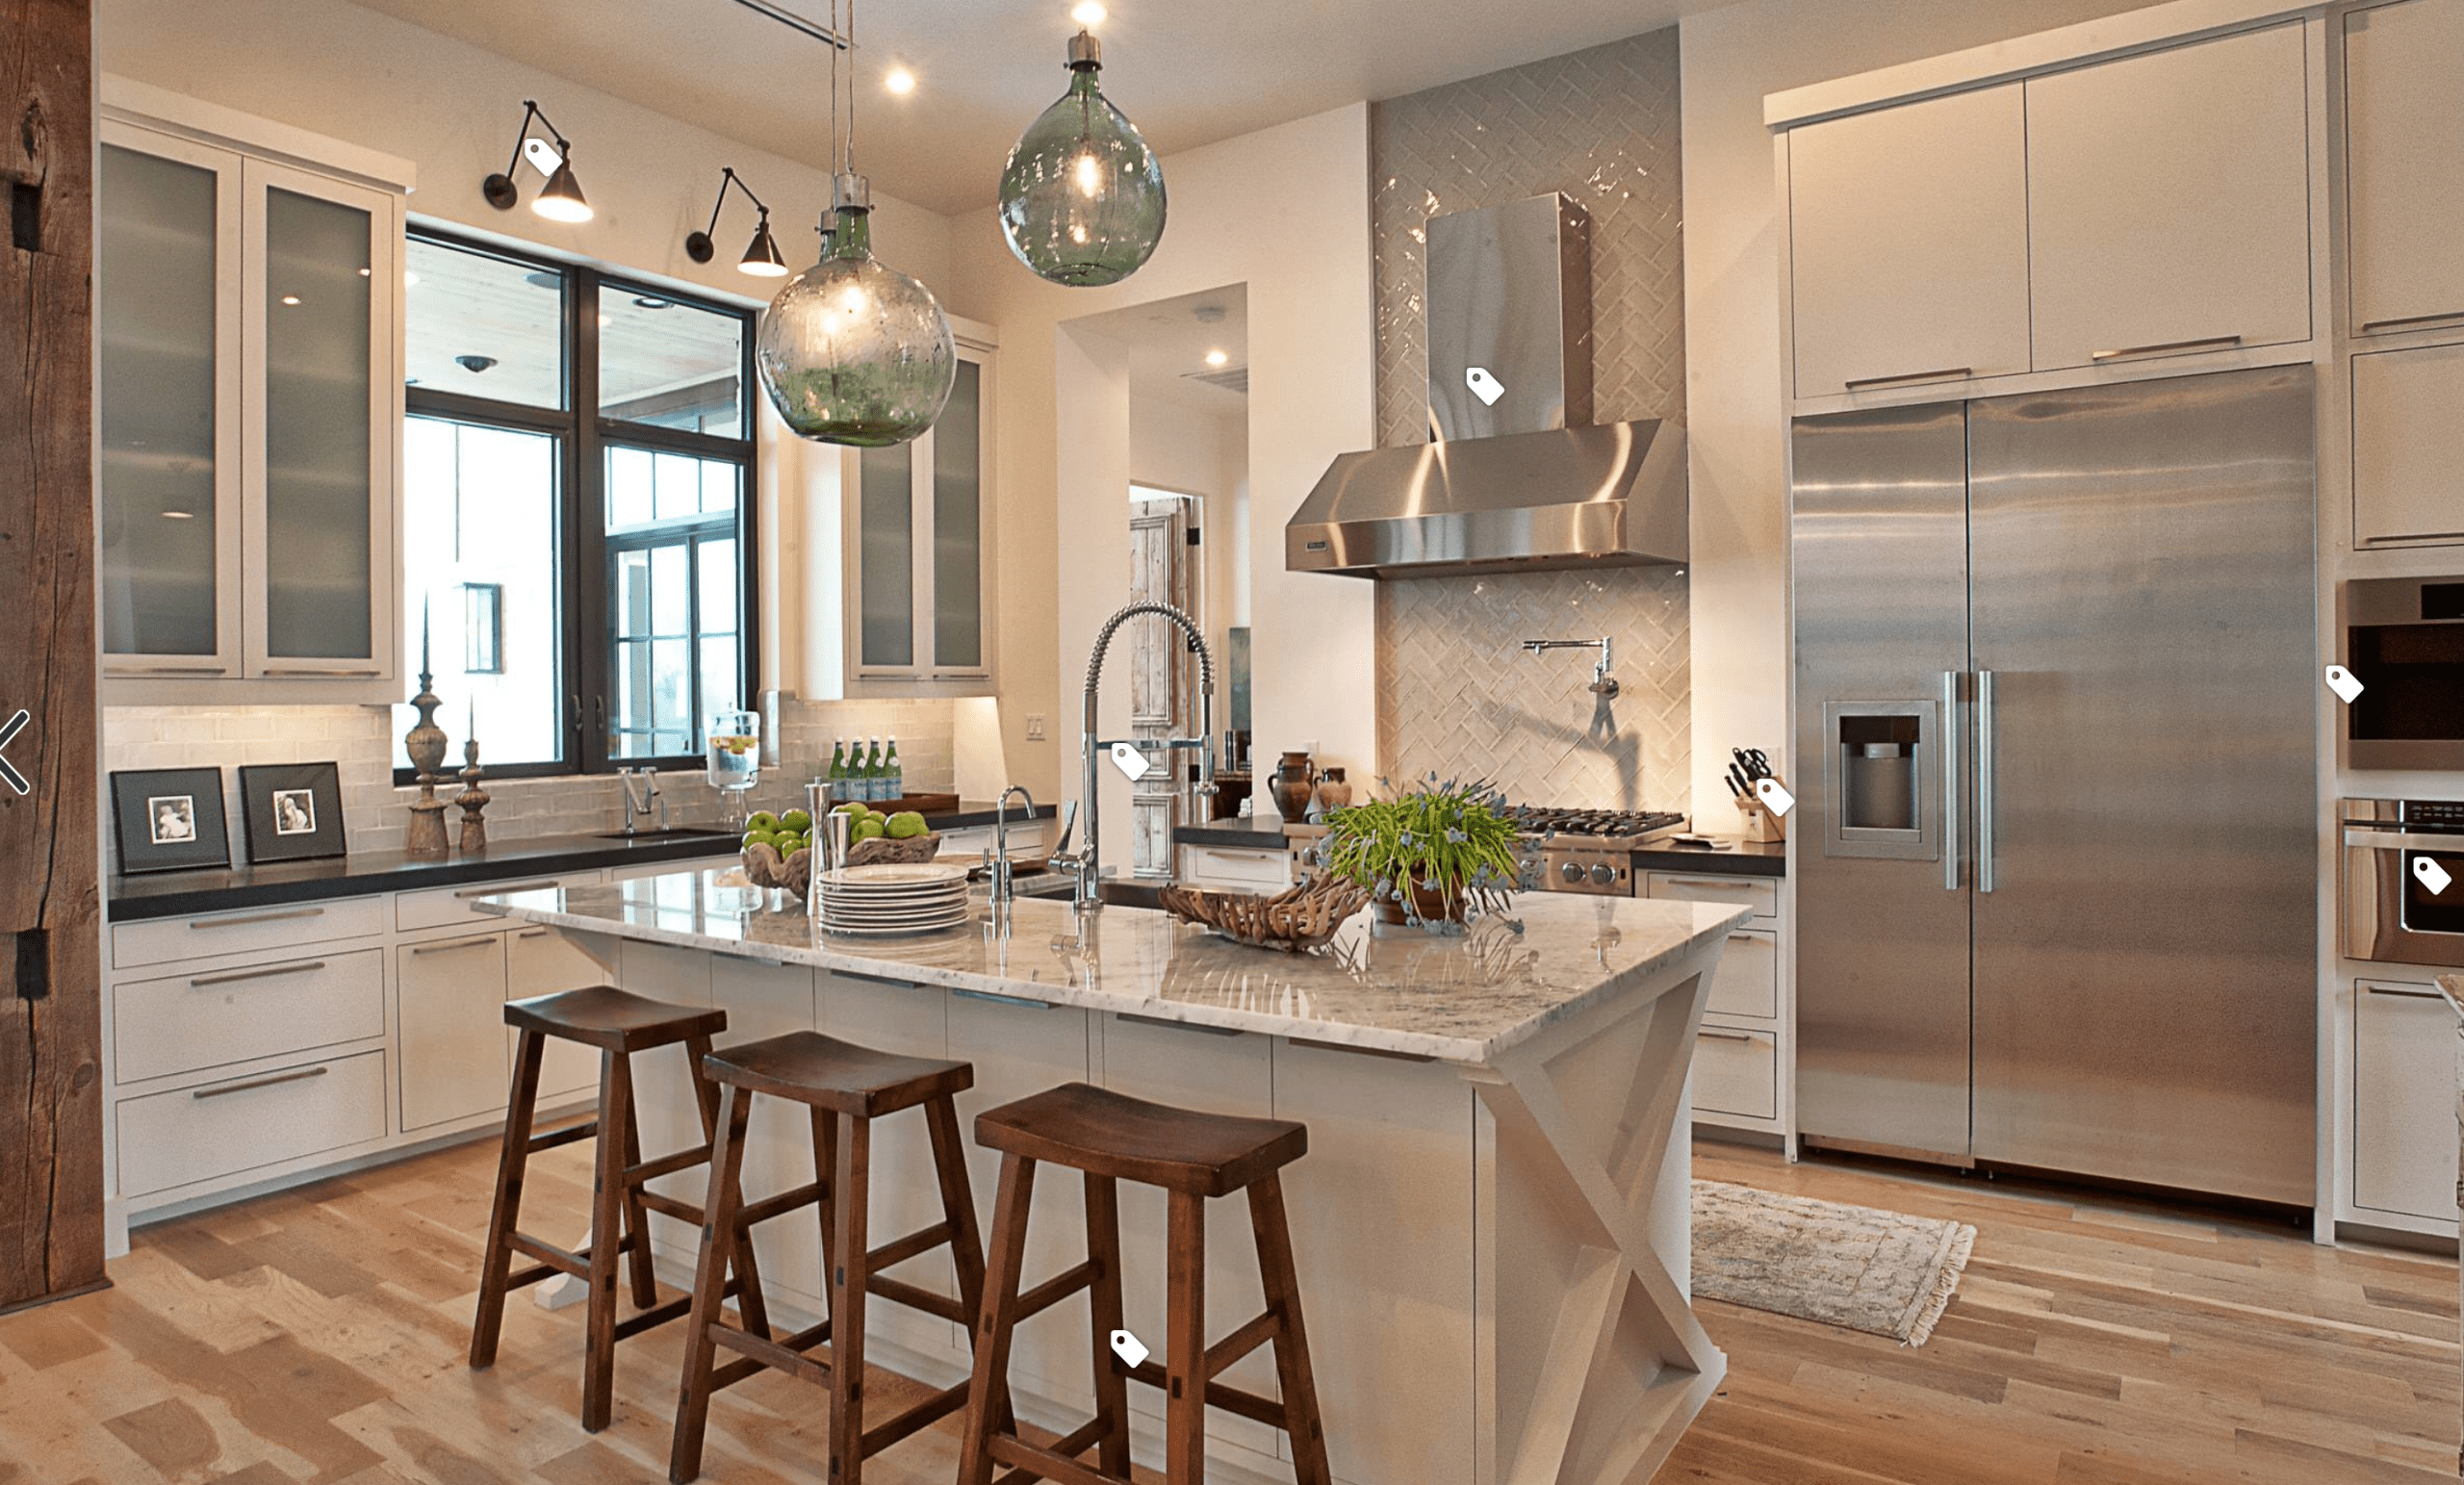 Eclectic The Best Kitchen Island Lighting Ideas